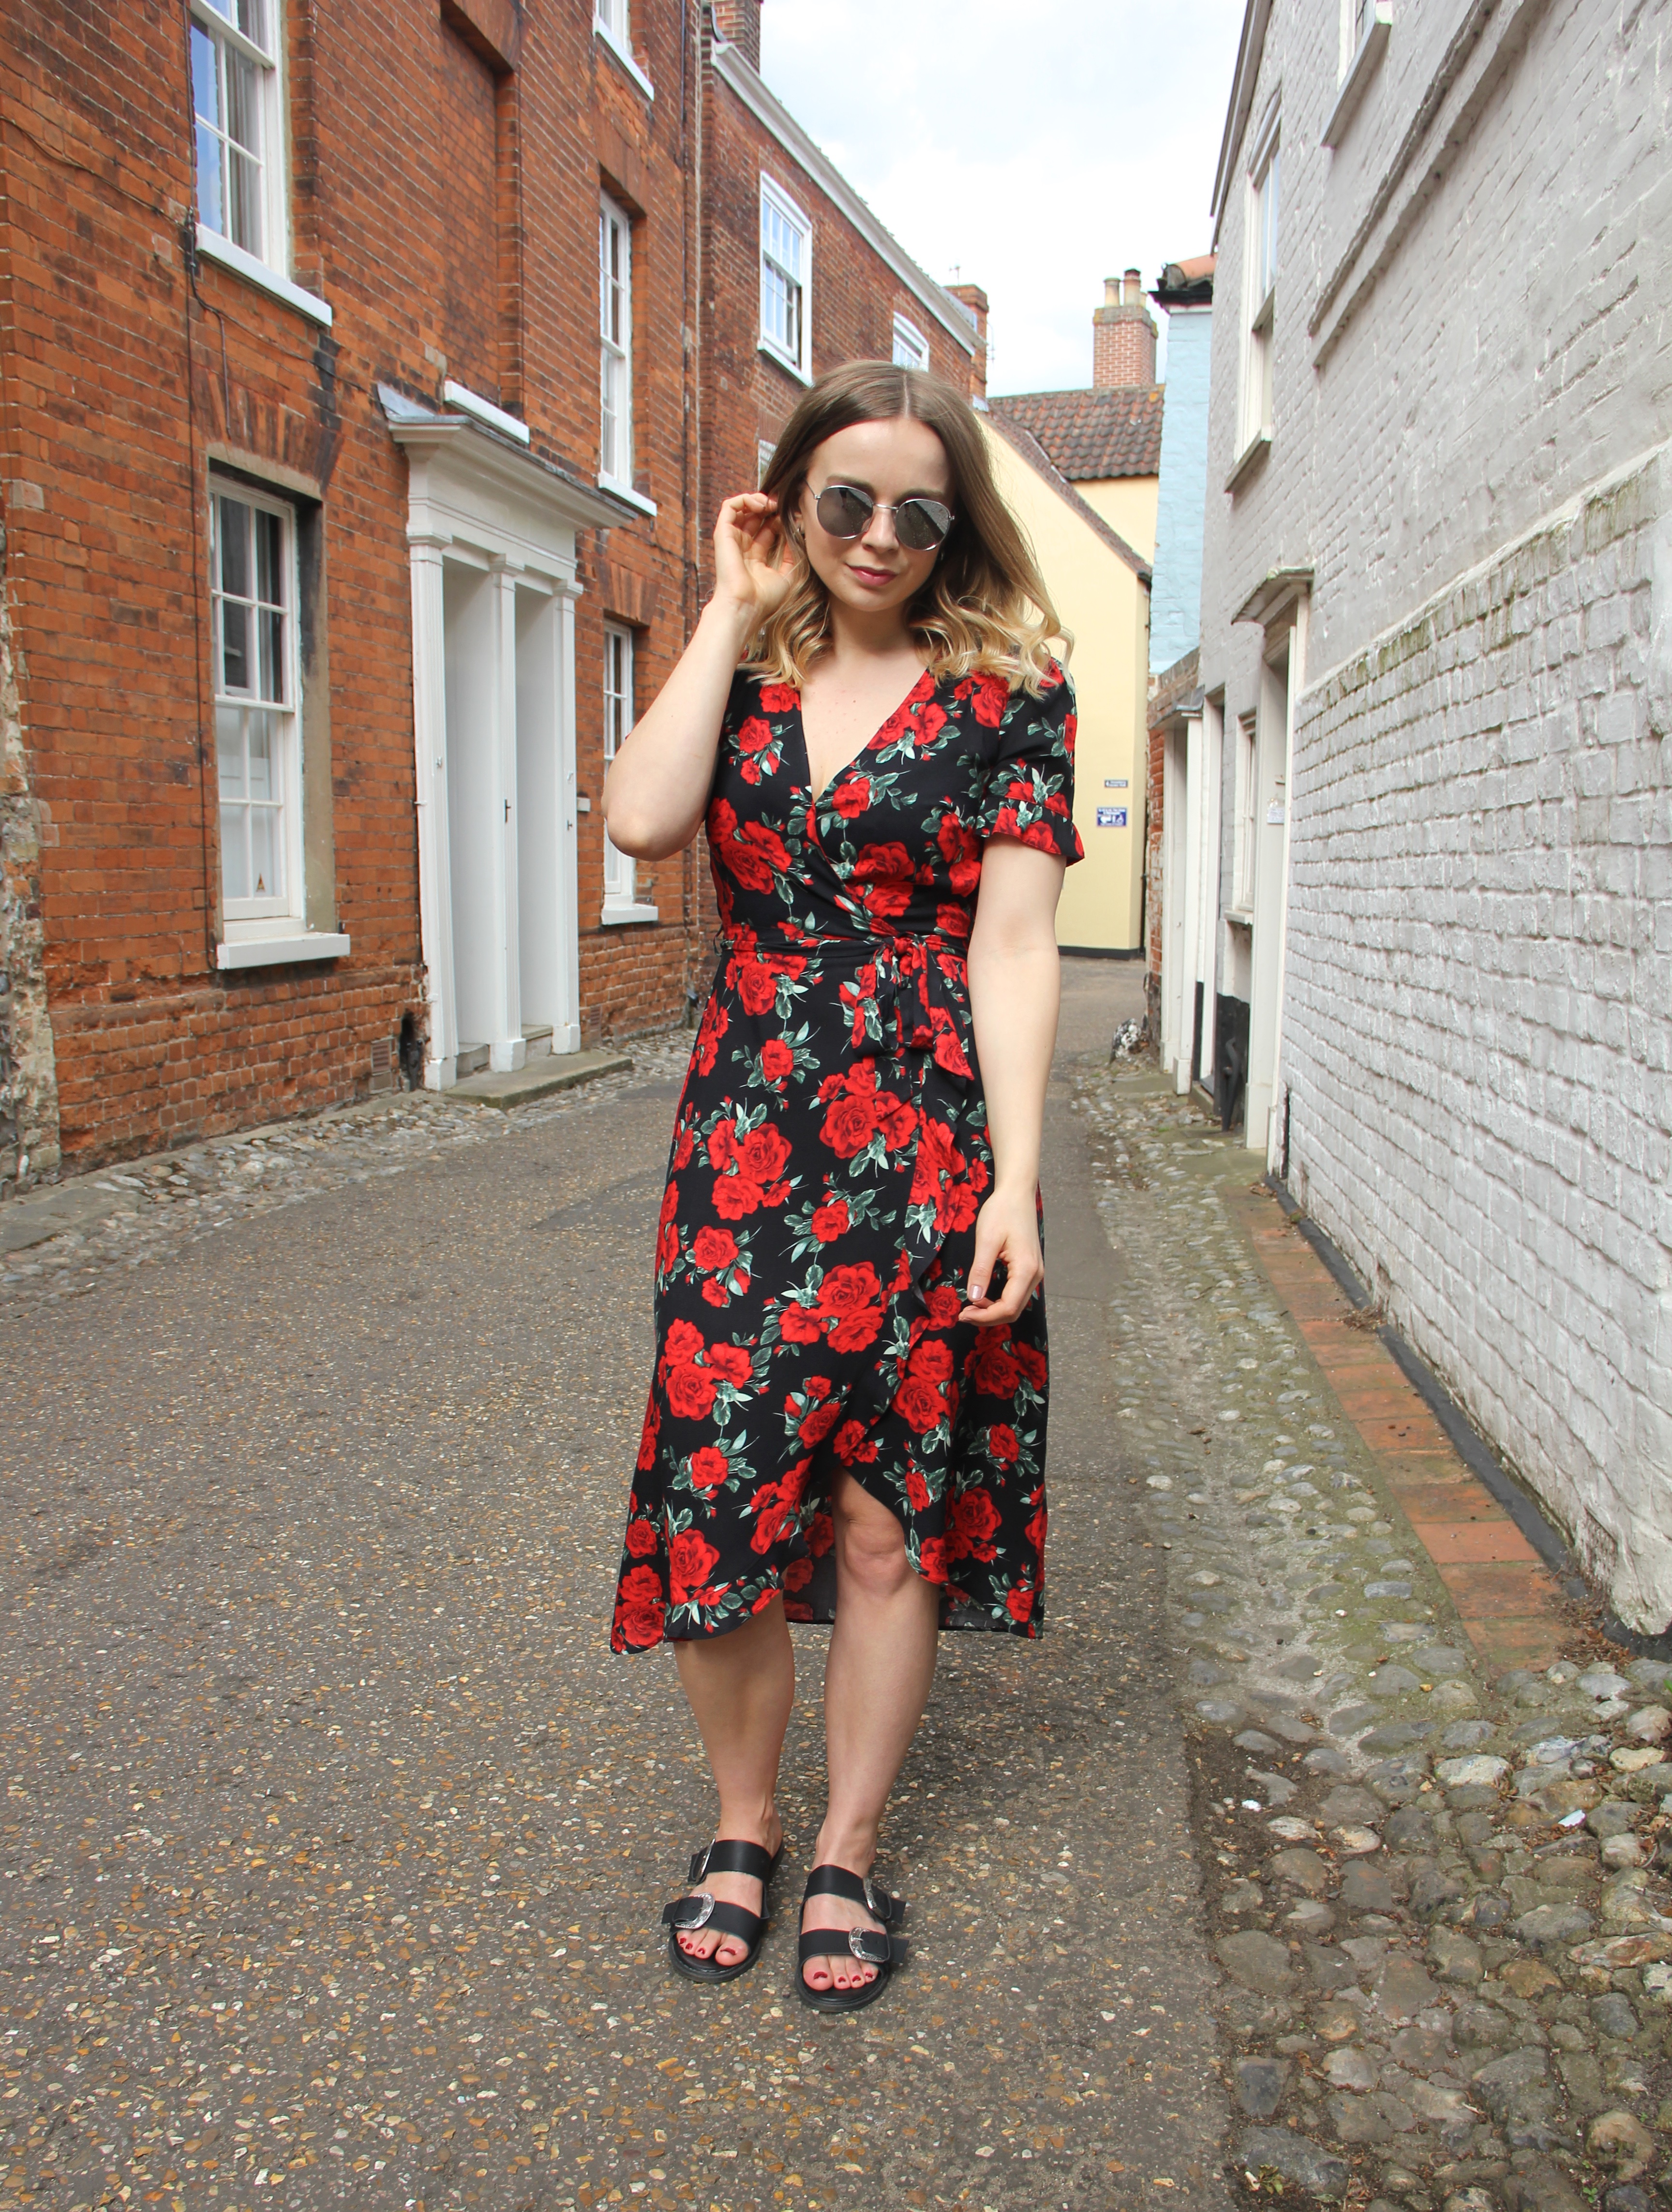 A sassy summer outfit from Primark 